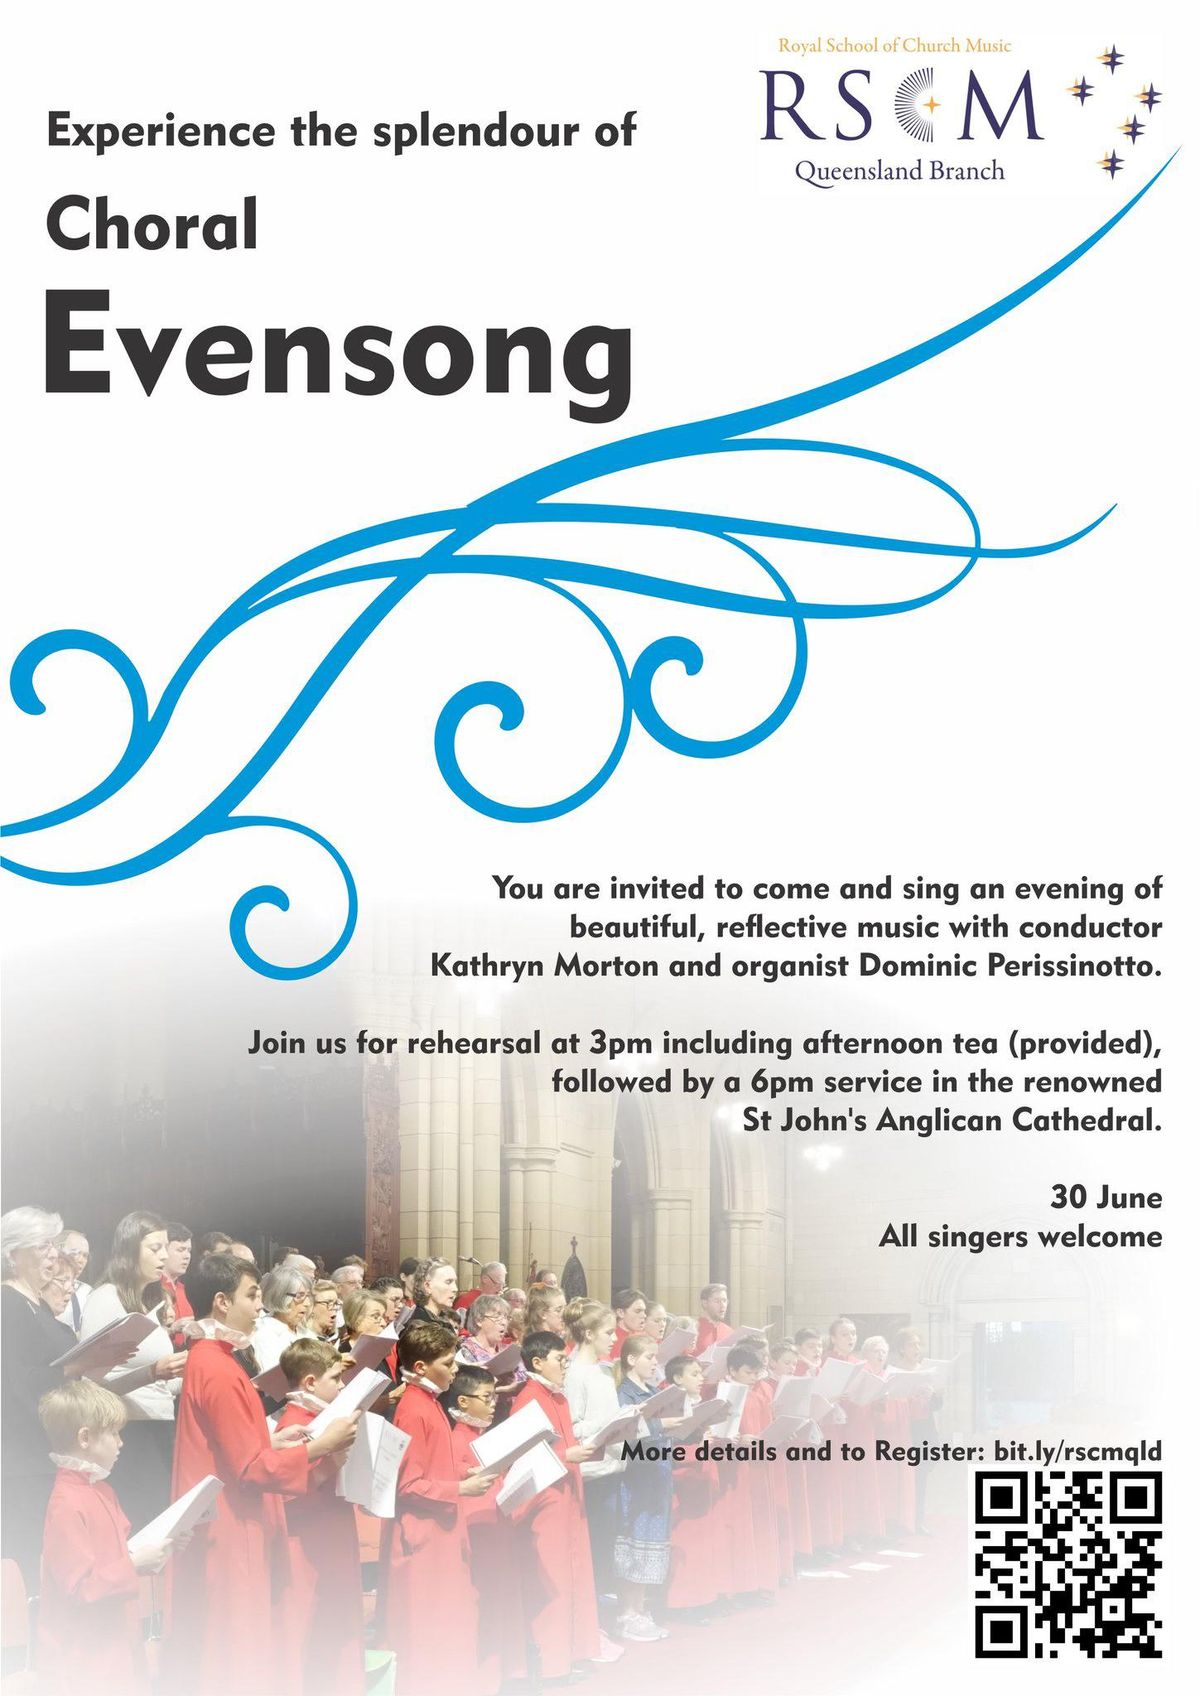 Experience the splendour of Choral Evensong